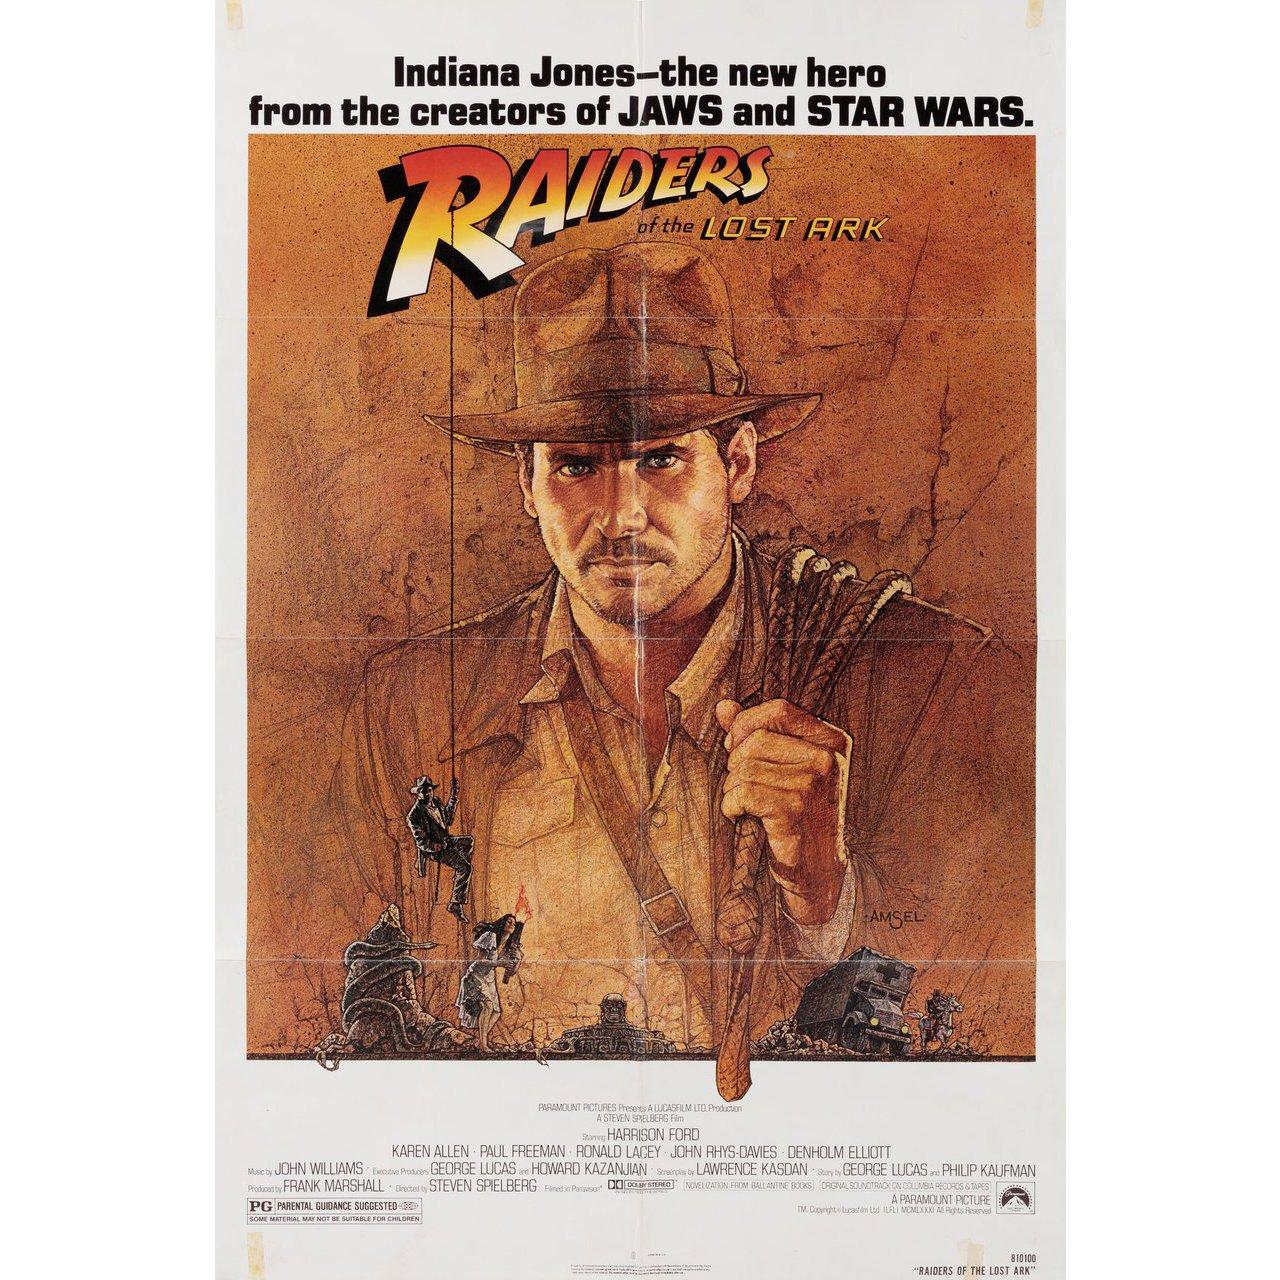 Original 1981 U.S. one sheet poster by Richard Amsel for the film Raiders of the Lost Ark directed by Steven Spielberg with Harrison Ford / Karen Allen / Paul Freeman / Ronald Lacey. Very Good-Fine condition, folded with tape stains in corners. Many